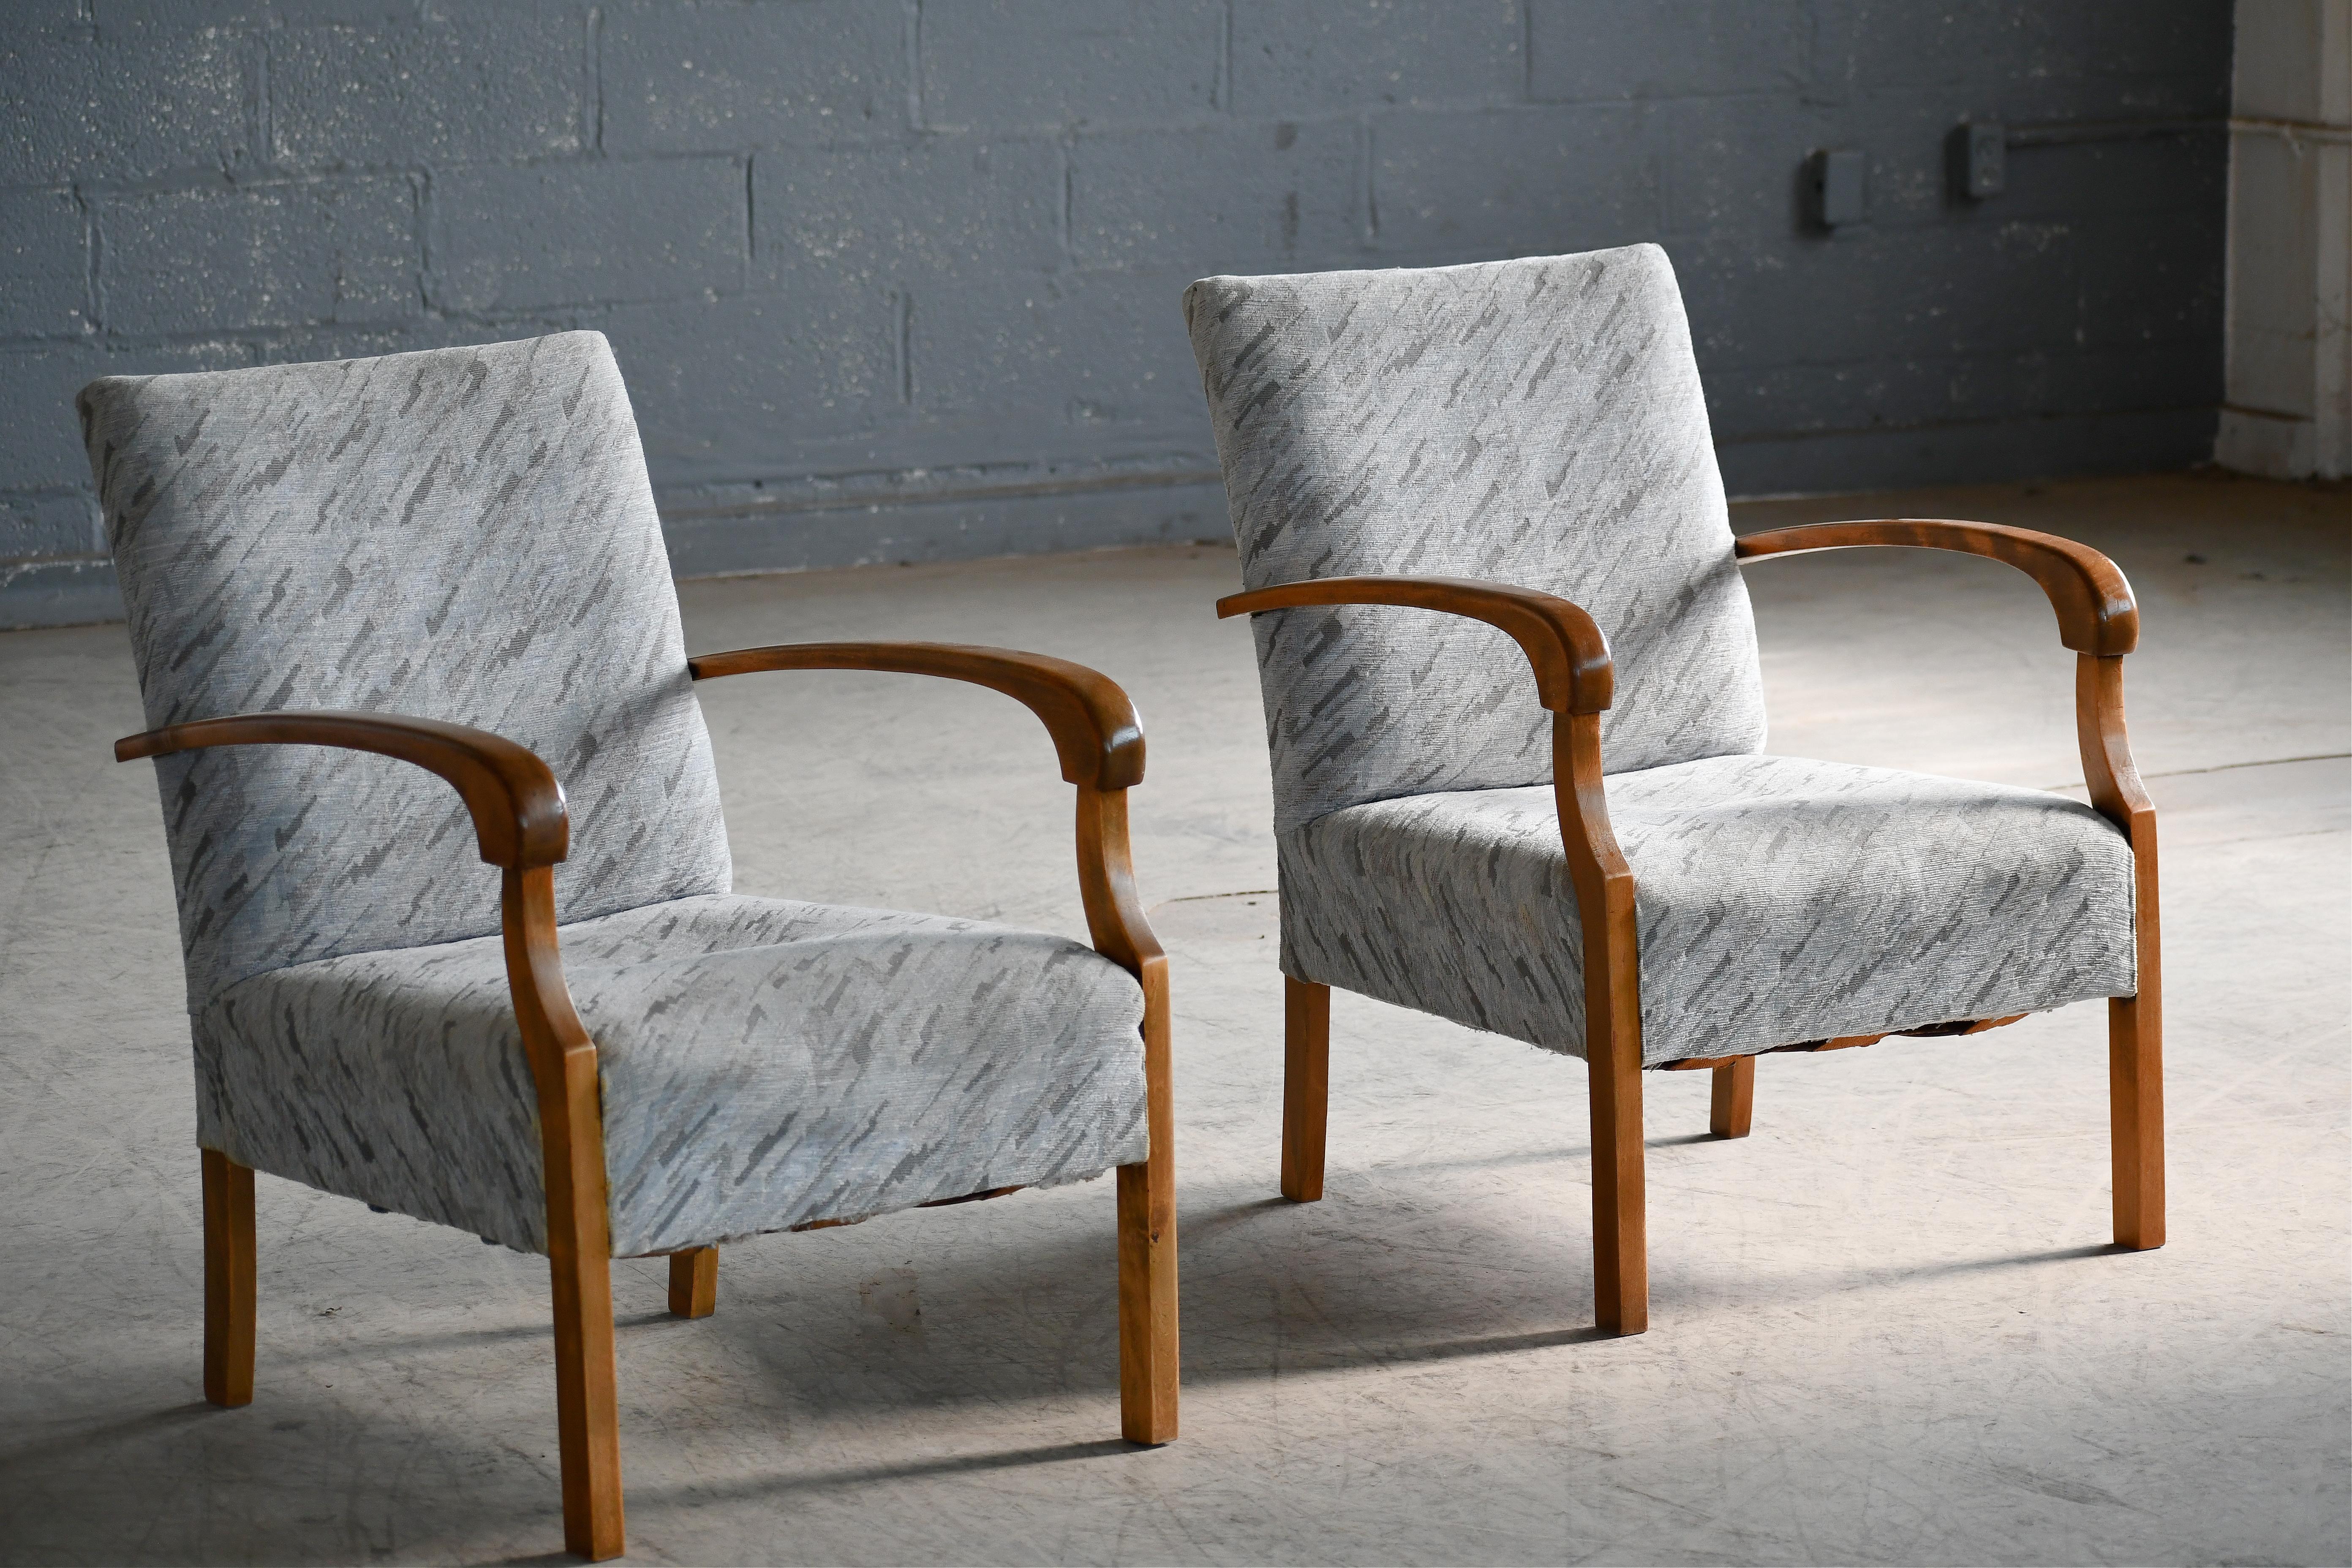 Superb Danish late Art Deco early midcentury chairs from the early 1930-40s with spring cushions and beautiful open armrests and legs carved in solid Birch with great grain and patina. We just love the simple yet very refined elegant design of these